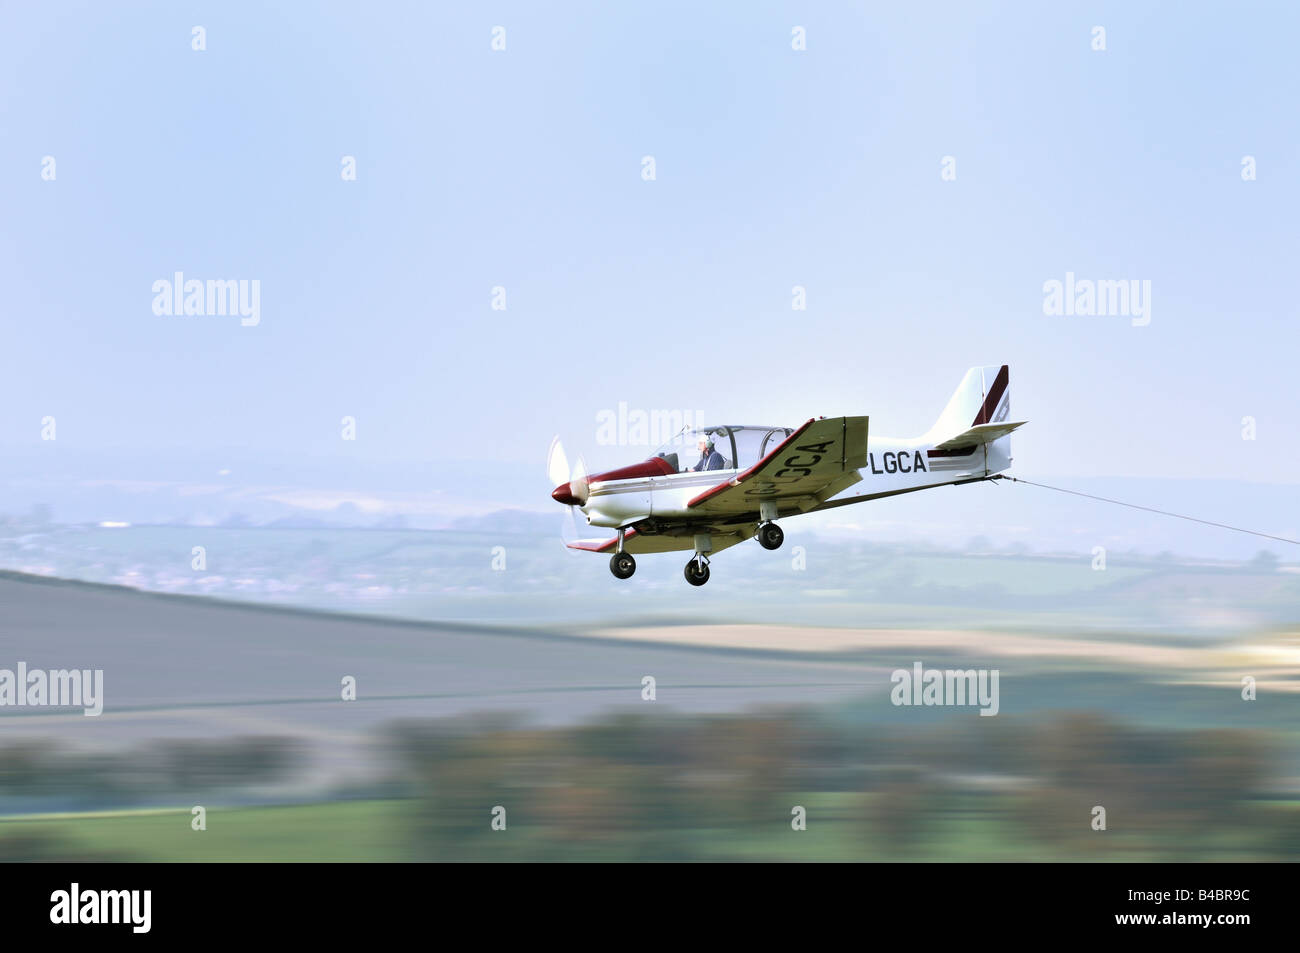 Light aircraft used to tow gliders showing trailing tow cable Stock Photo